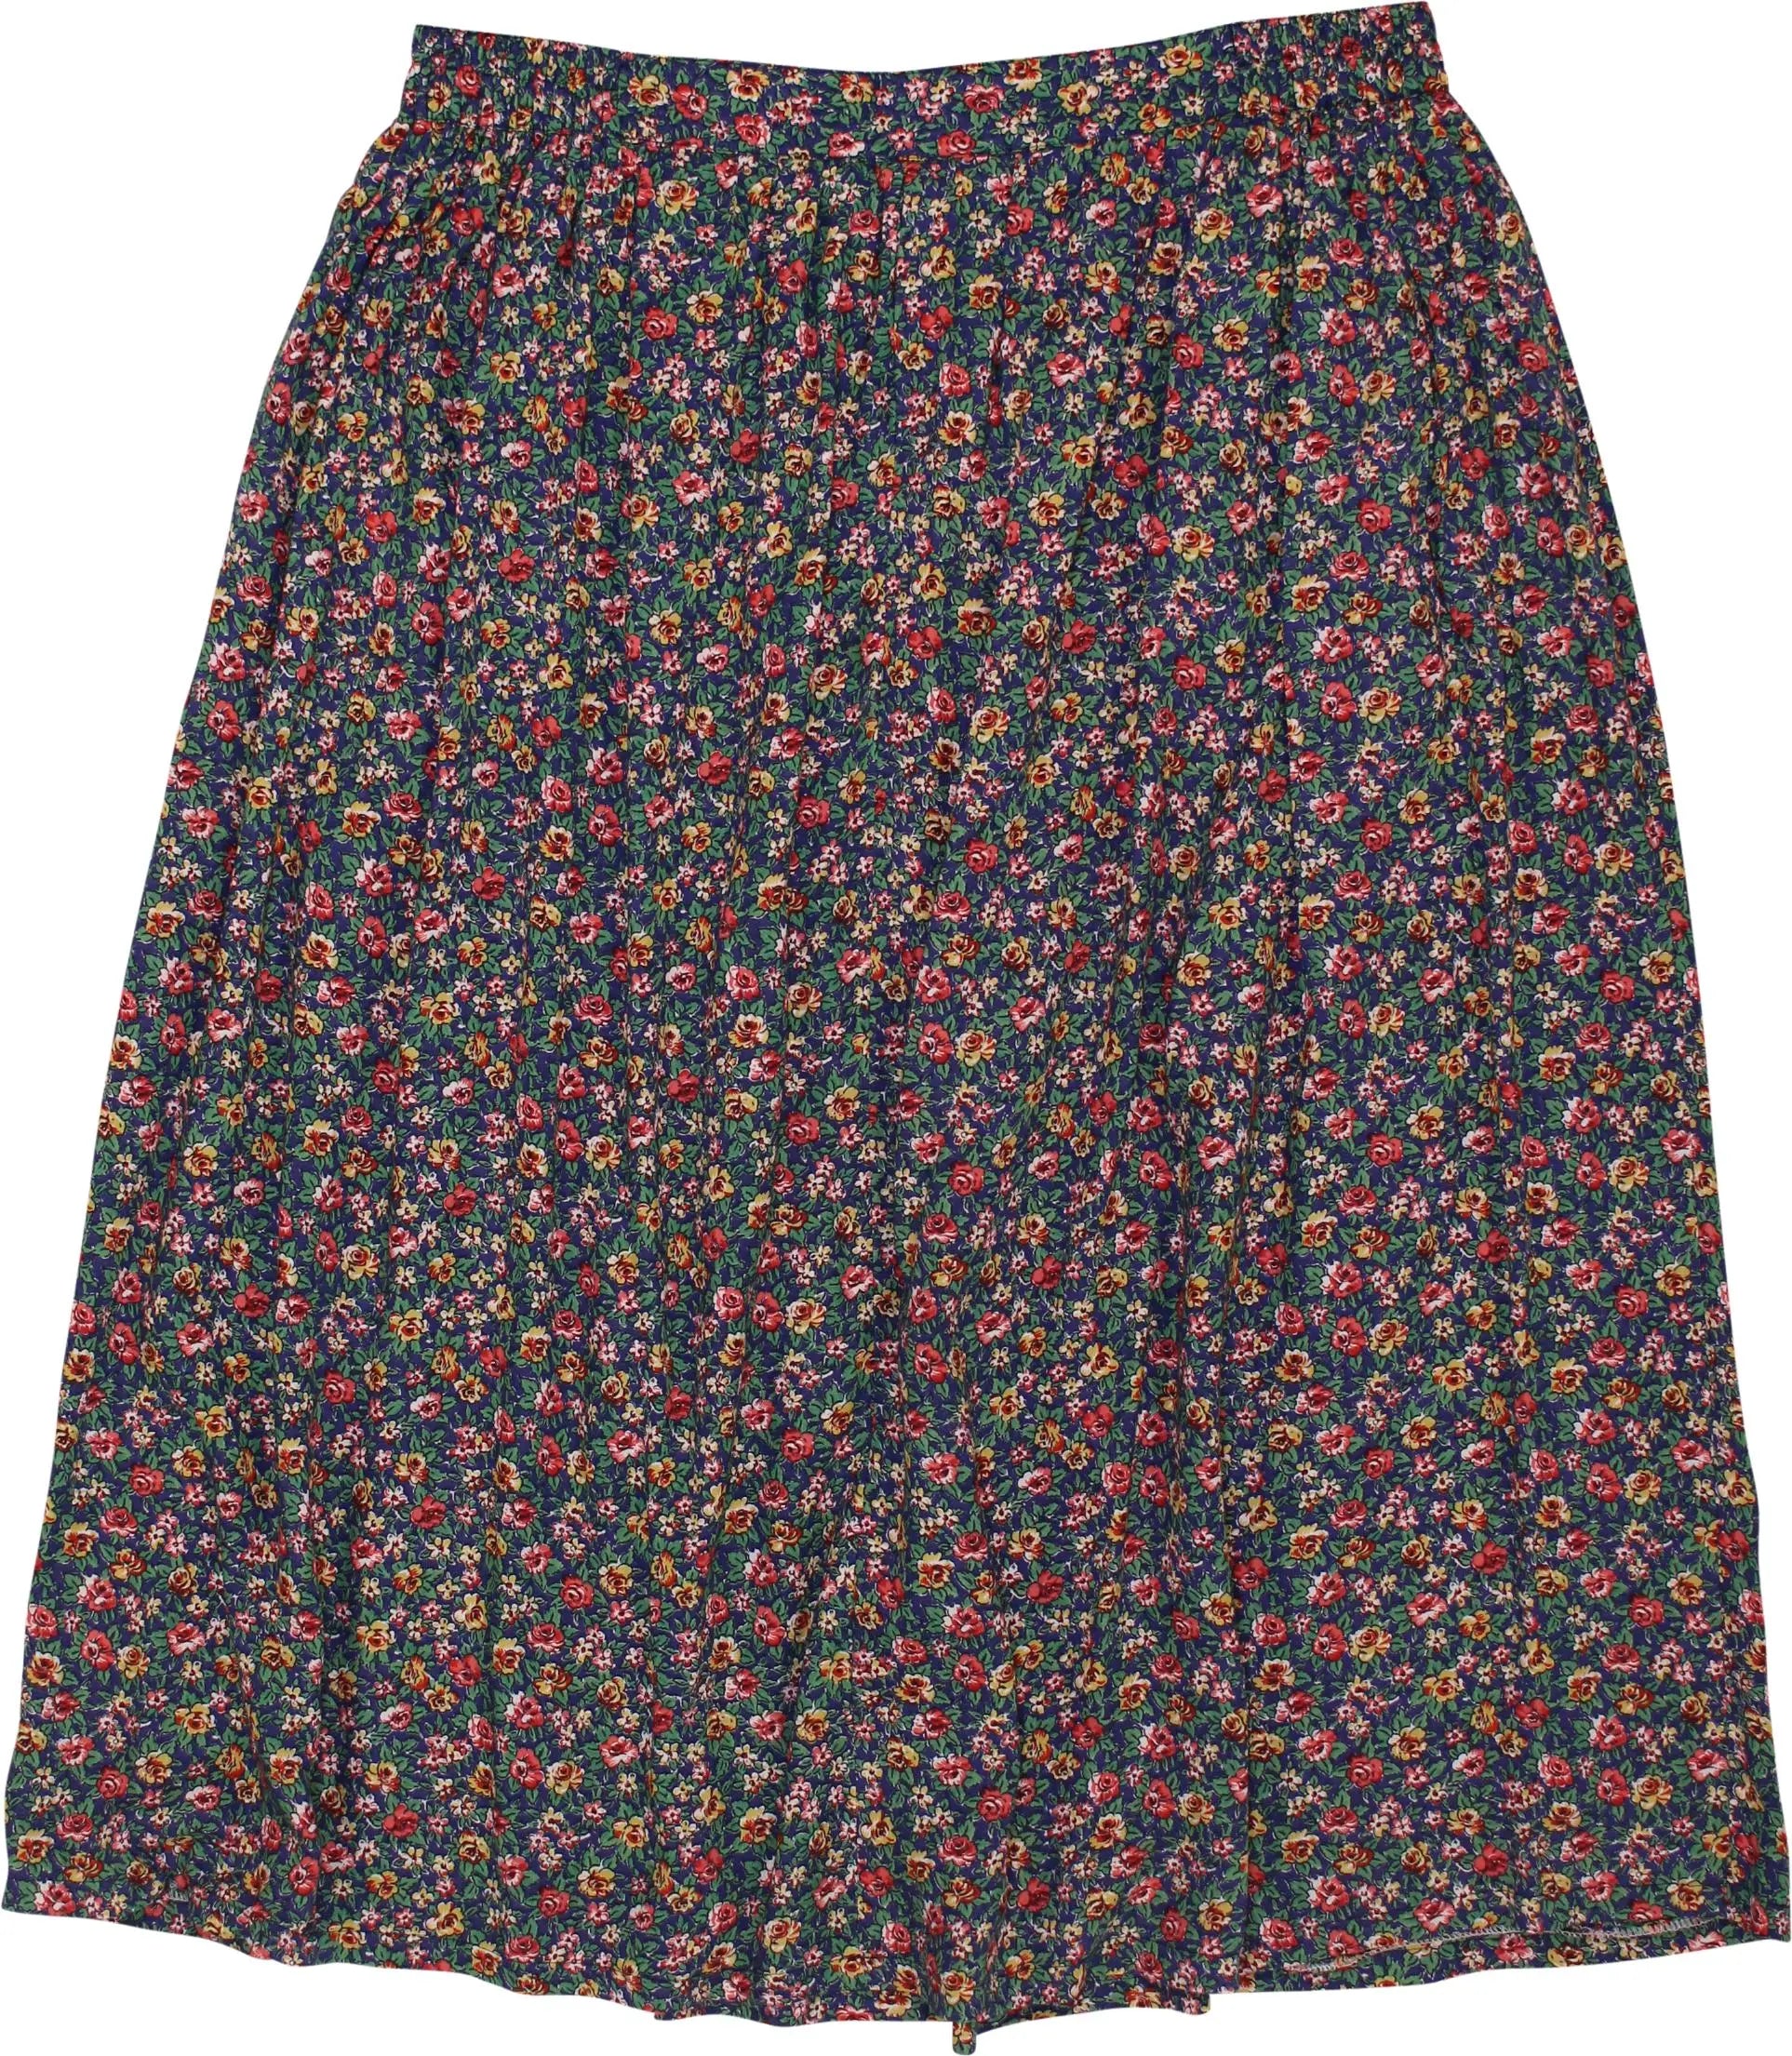 Unknown - 80s Skirt with Flower Print- ThriftTale.com - Vintage and second handclothing